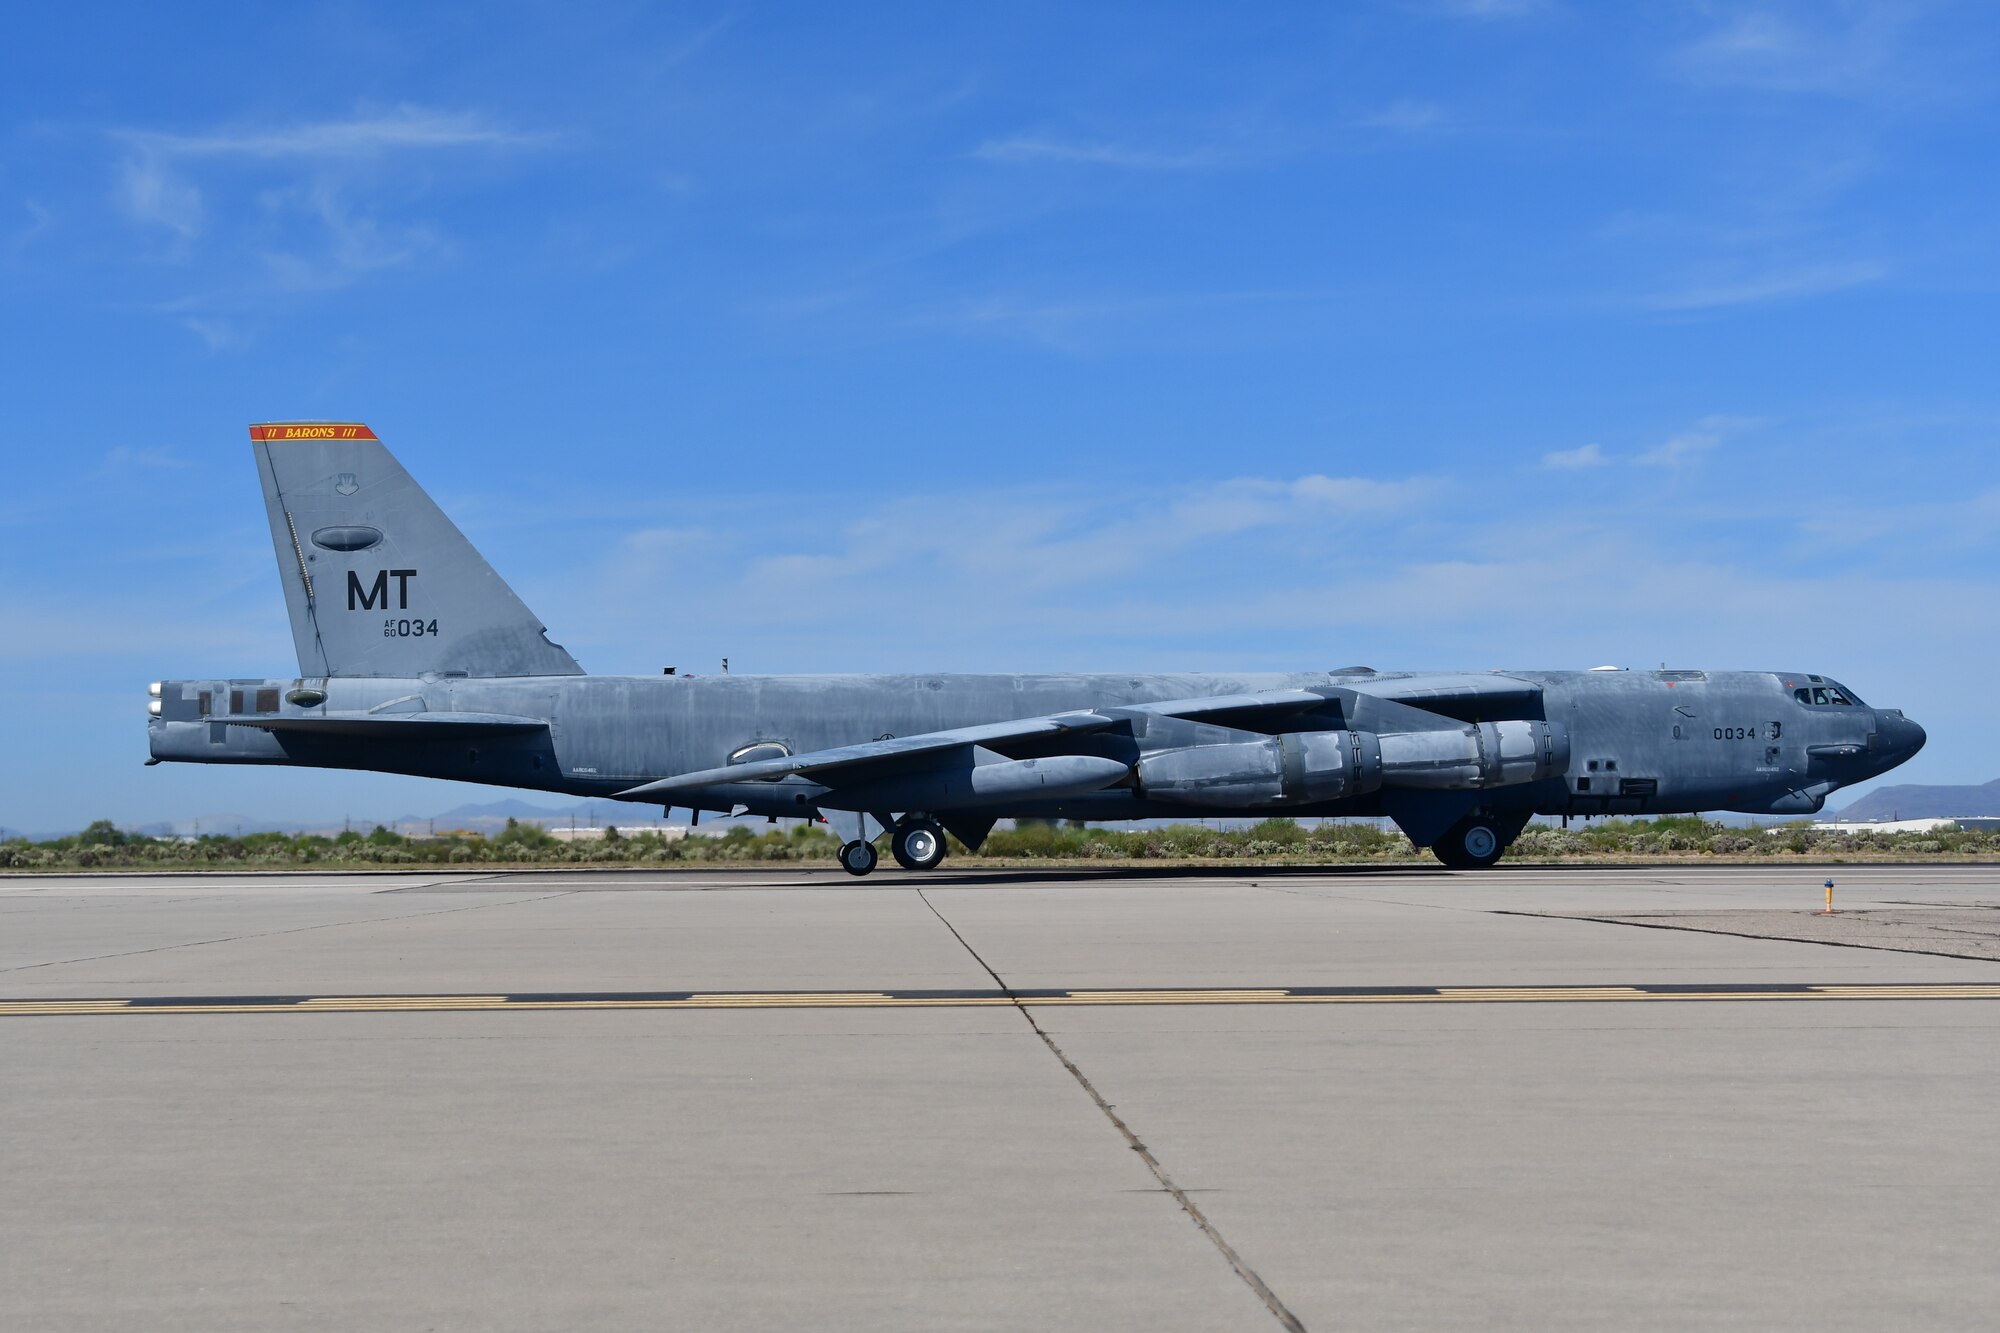 The B-52H completed phase one of its regeneration process at the 309th Aerospace Maintenance and Regeneration Group. It is scheduled to complete its phase depot maintenance in February of 2021 as a completely restored, fleet configured B-52H.